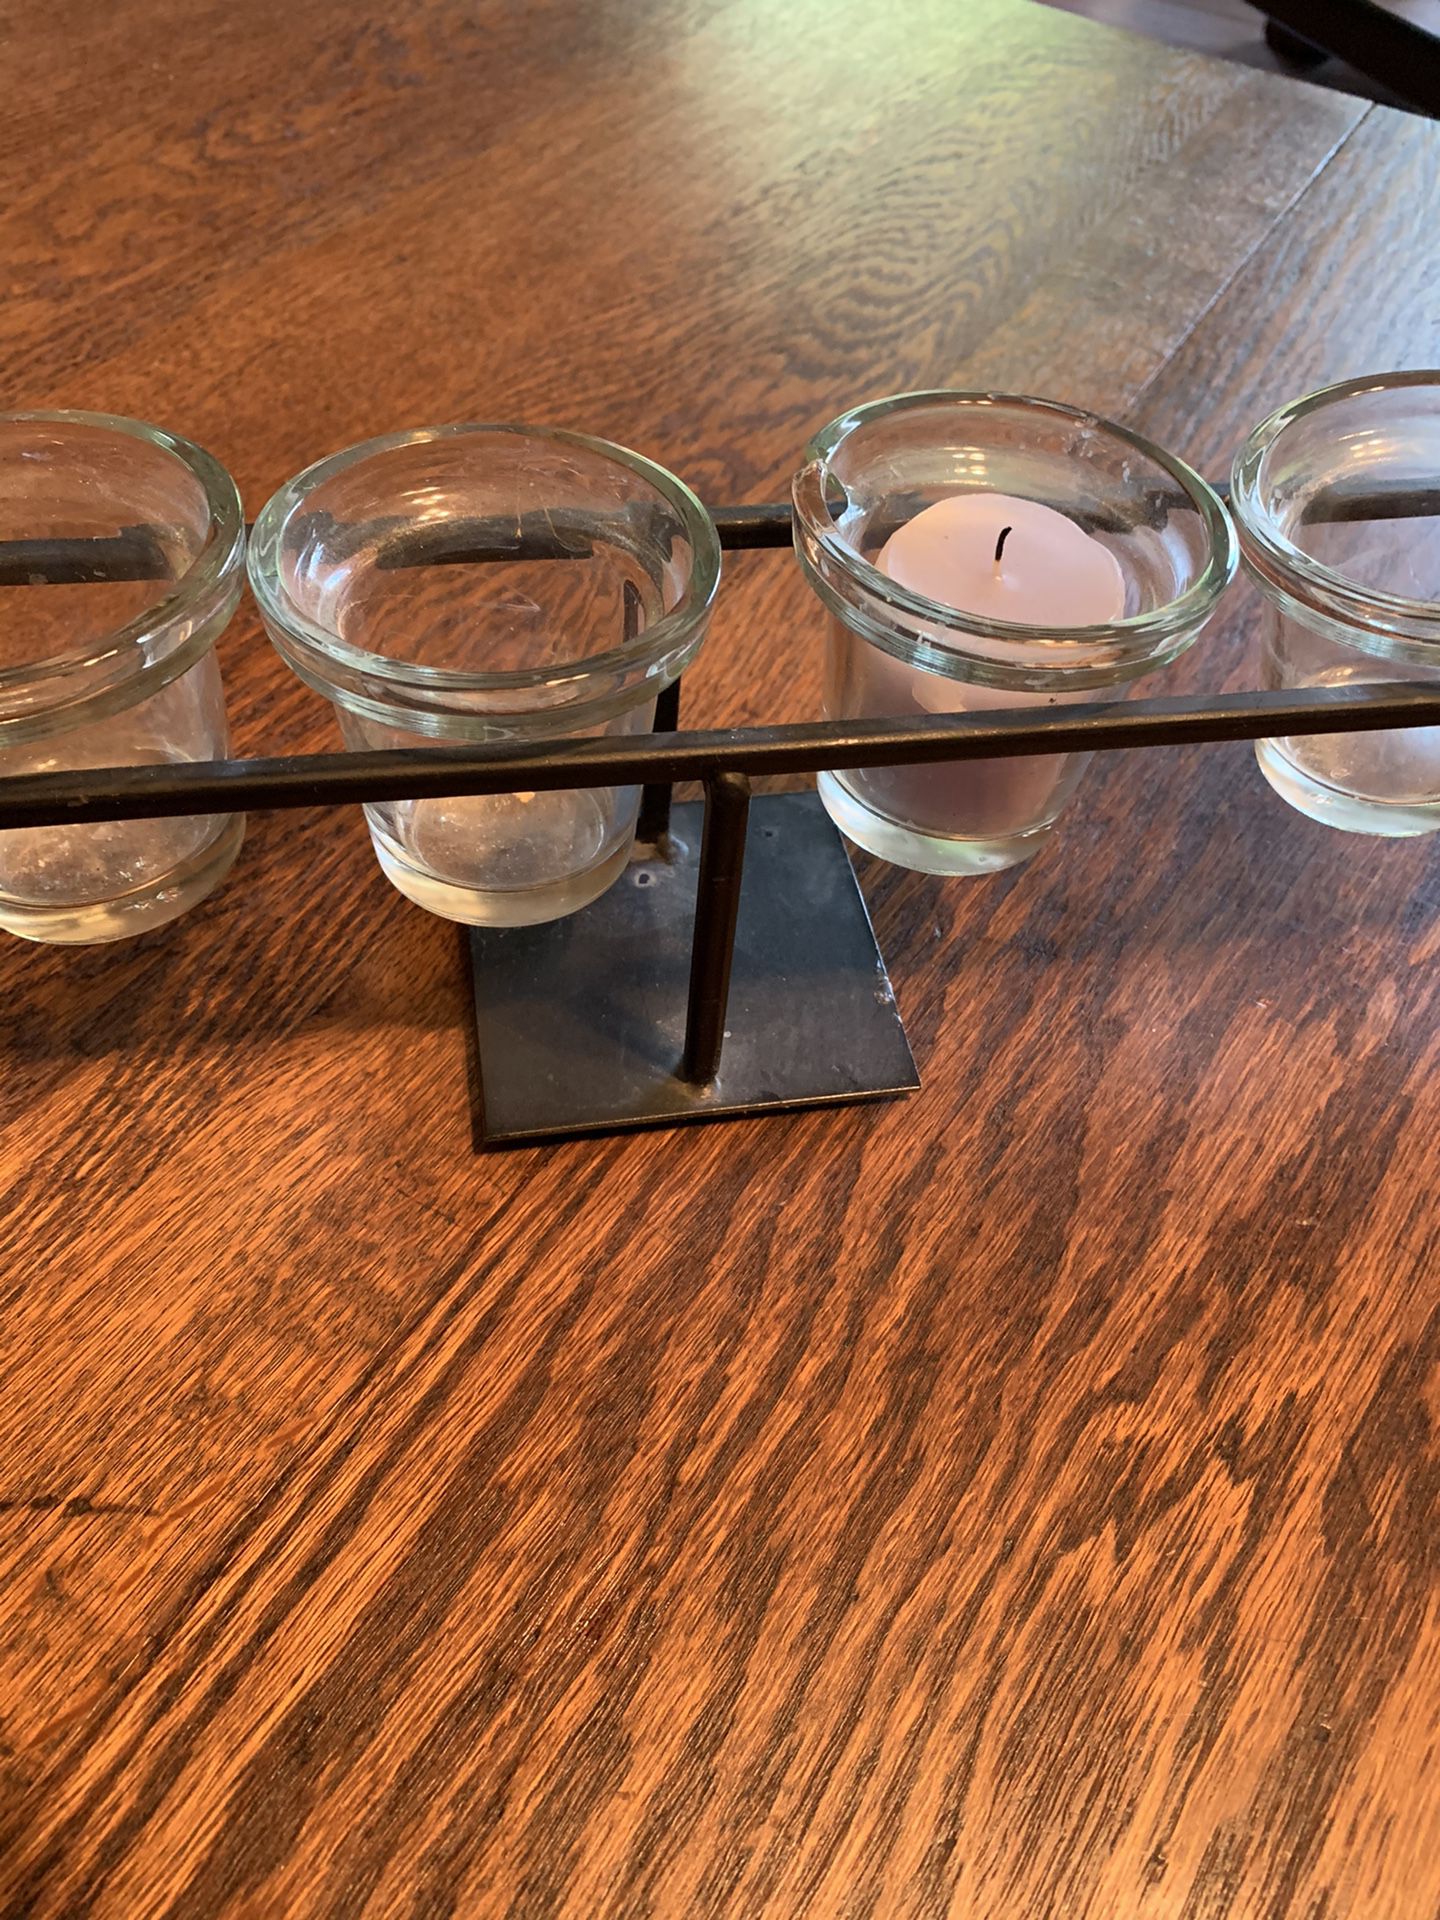  CANDLE HOLDER / For 12 Tea Lights, Beautiful On A Dining Table Or Coffee Table